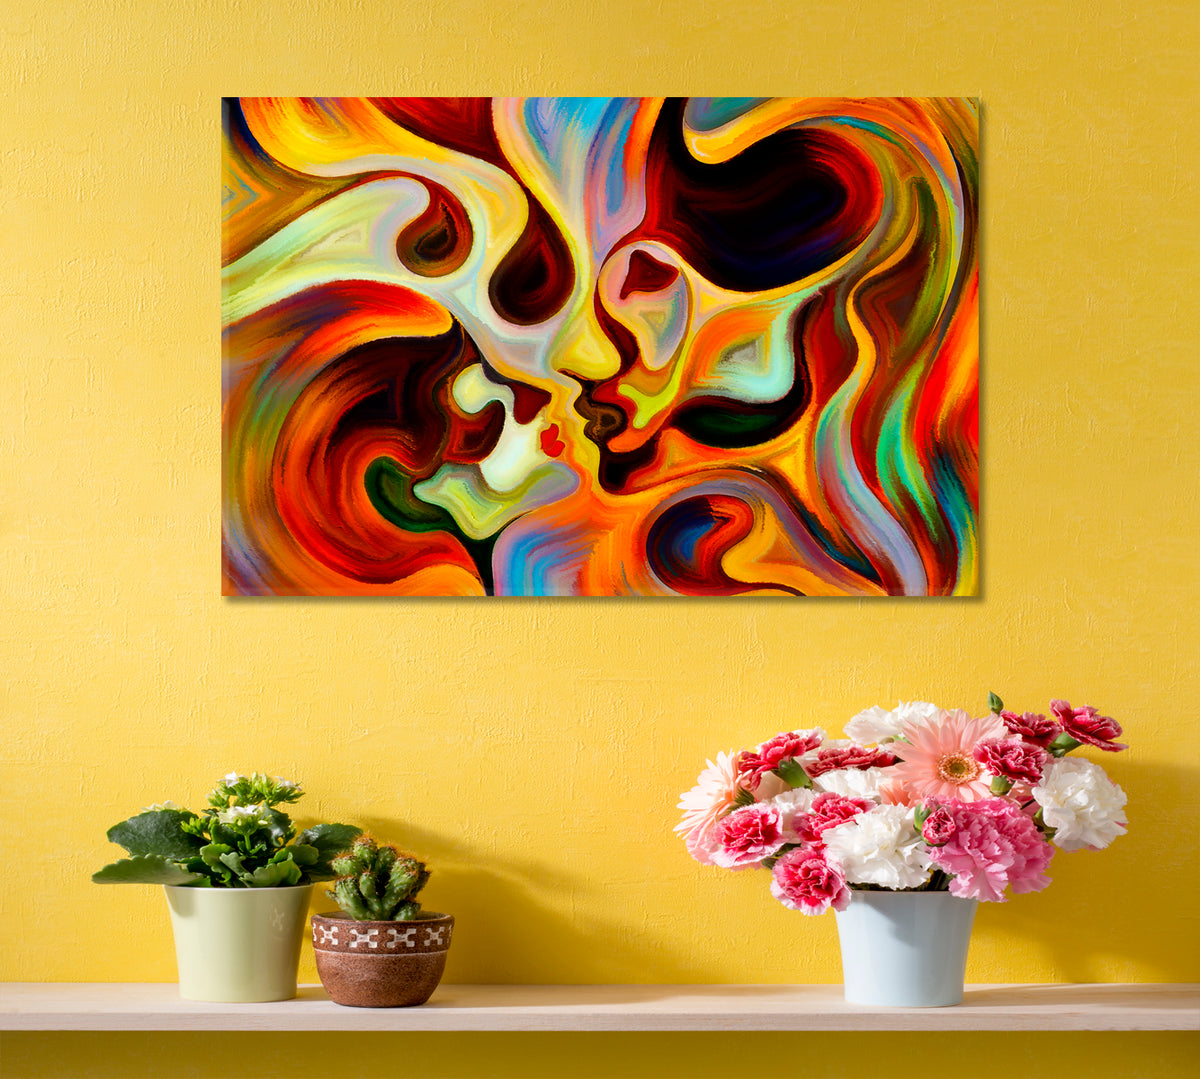 Colors of the Mind Graceful Profile Lines Abstract Vision Contemporary Art Artesty 1 panel 24" x 16" 